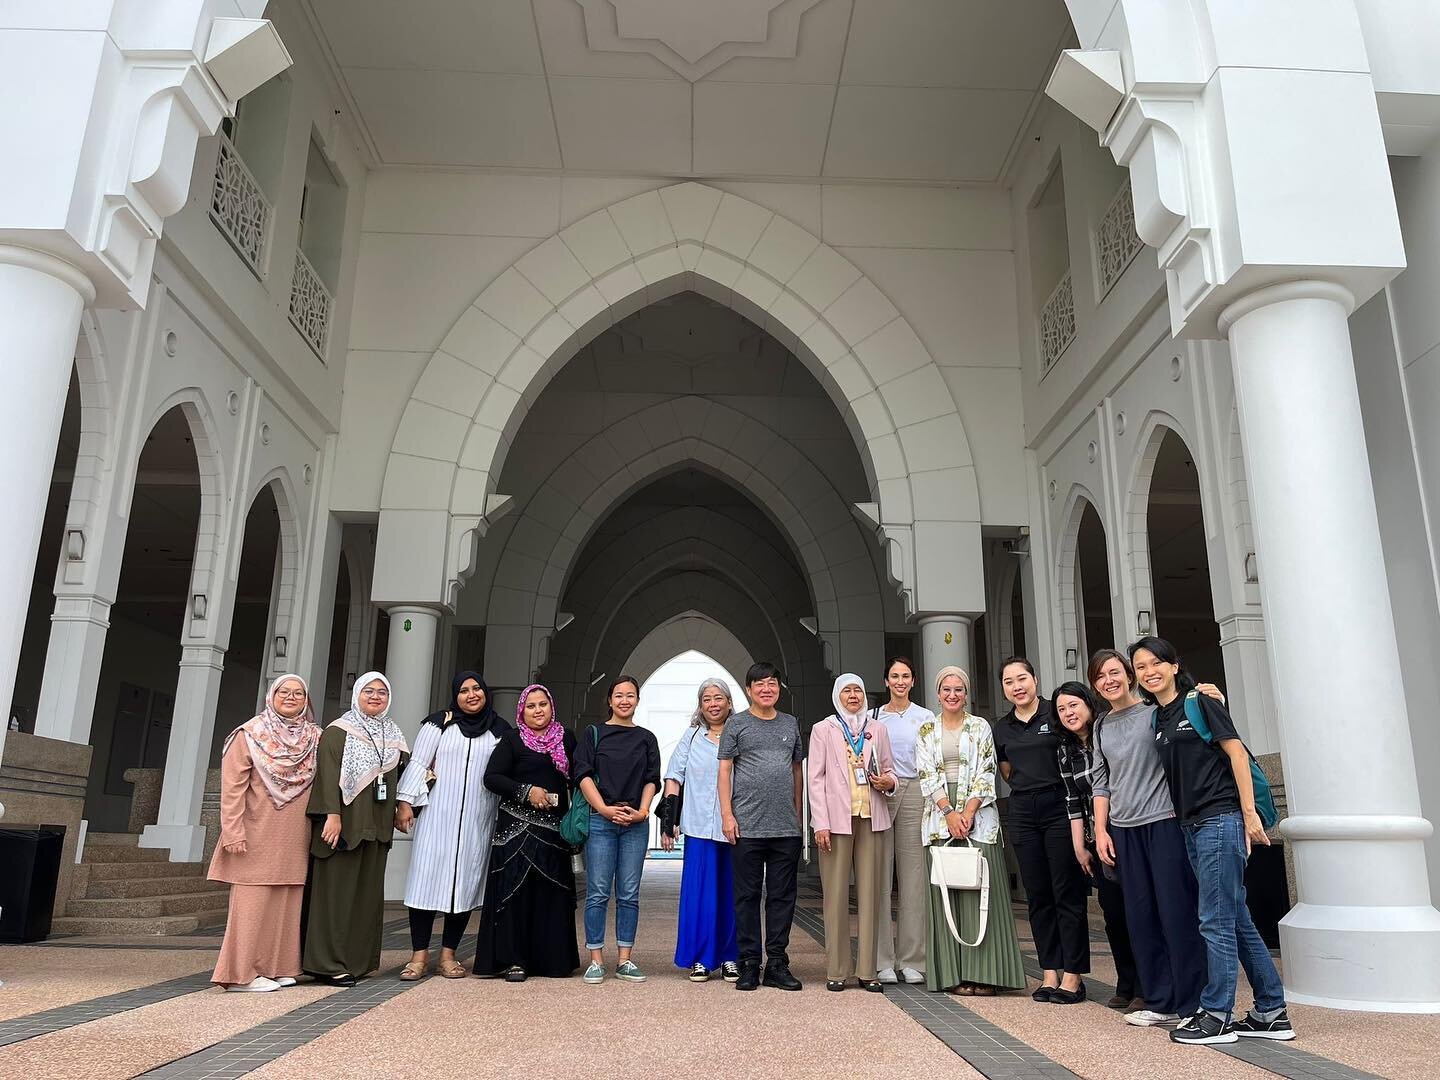 Asia Dreams Malaysia Field Visit to Kedah over the week. 

Thank you @fugee_org for organising a visit to Albukhary Islamic University where we got to meet seven refugee students who are getting scholarships to complete their tertiary education and n